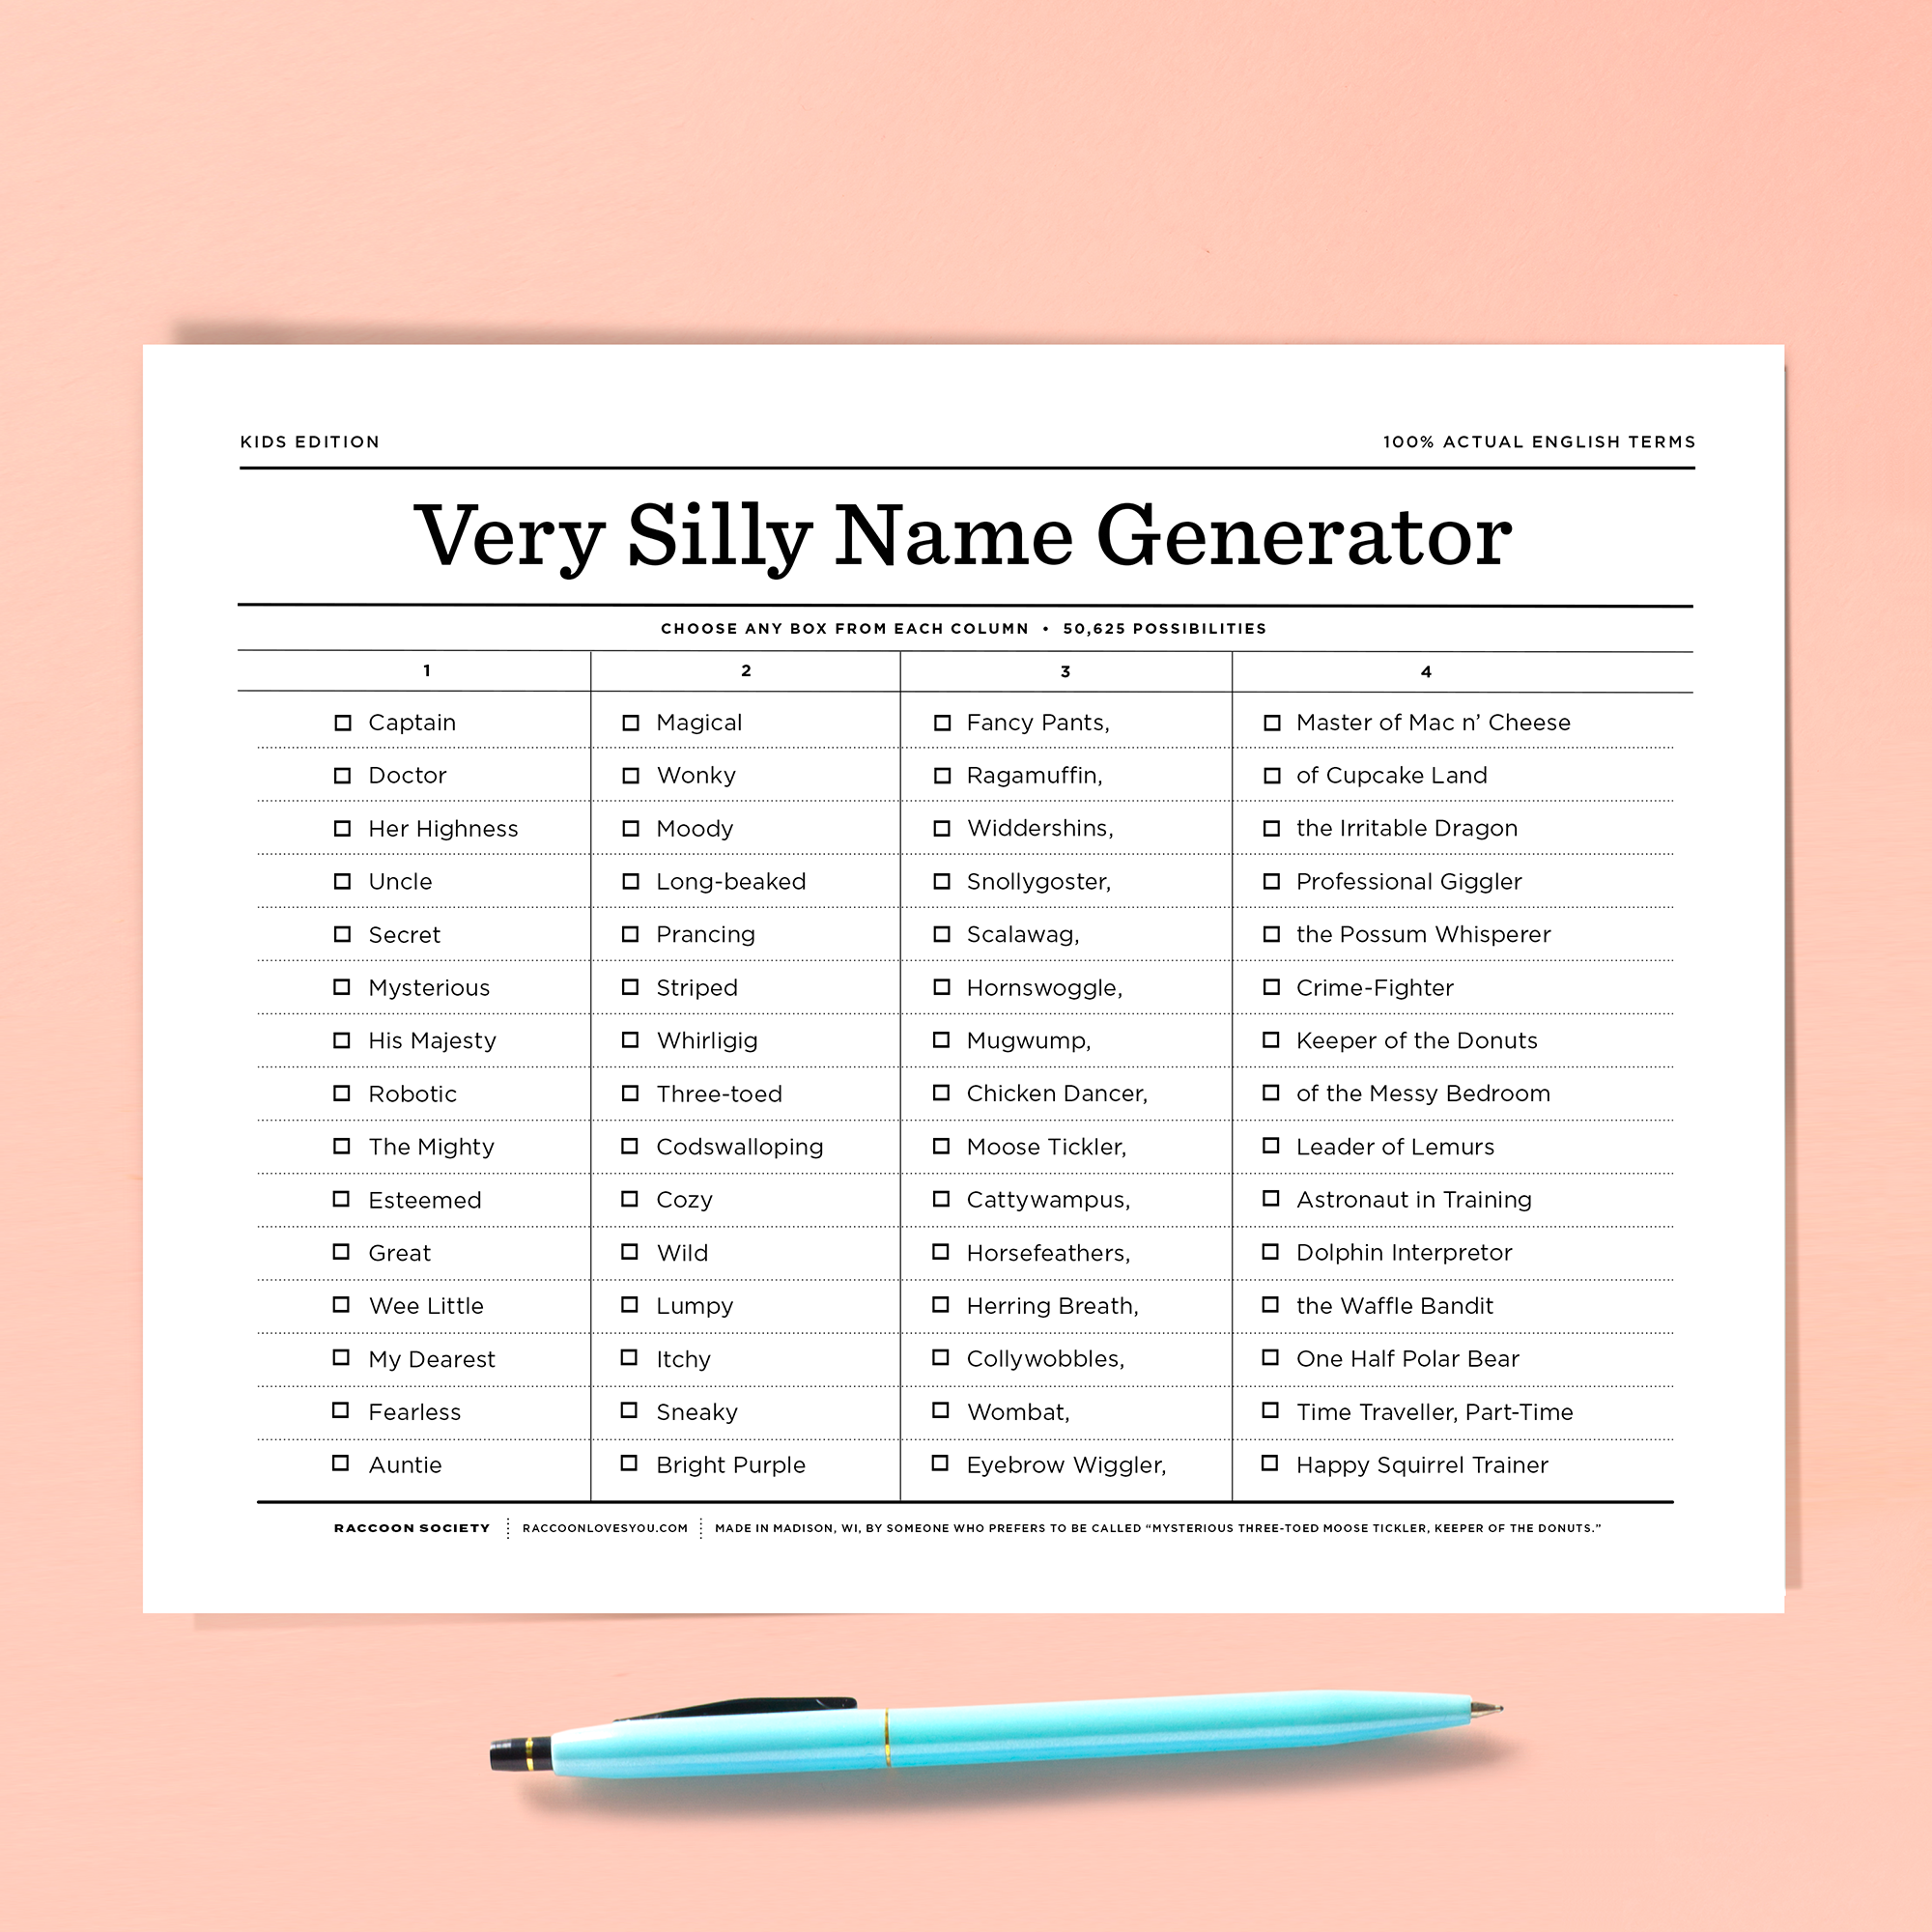 Free Very Silly Name Generator Kids Edition Downloadable Jpeg Raccoon Society